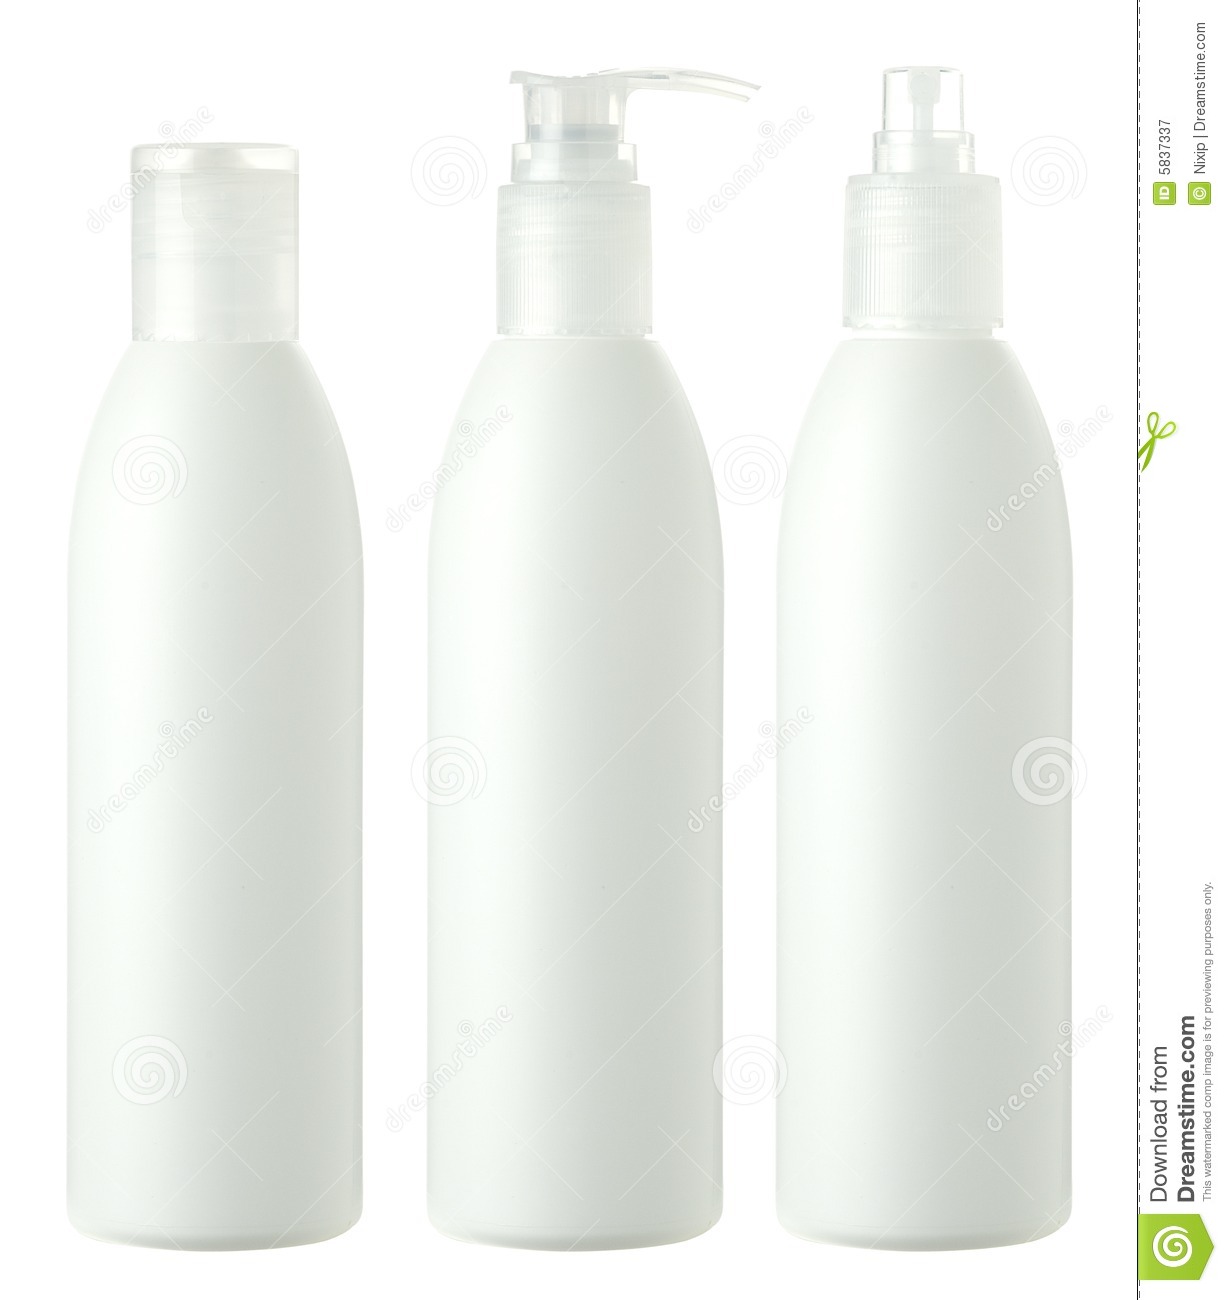 Hair Care Bottles Isolated On White Royalty Free Stock Photography    